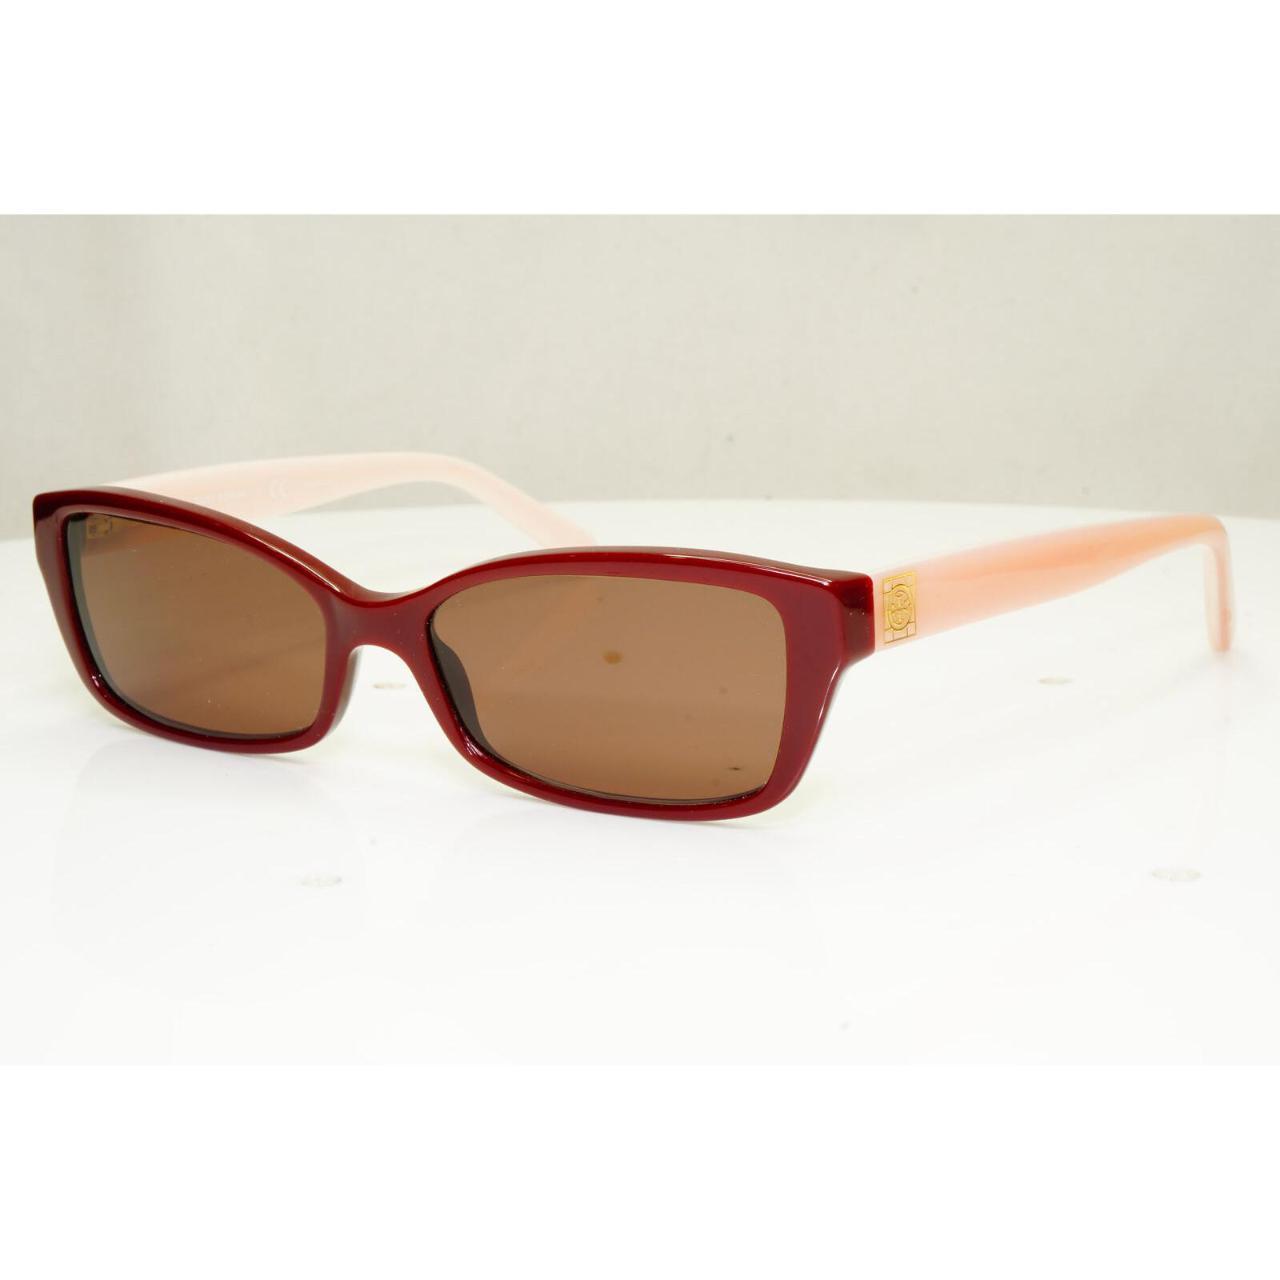 Product Image 1 - These sunglasses and all other